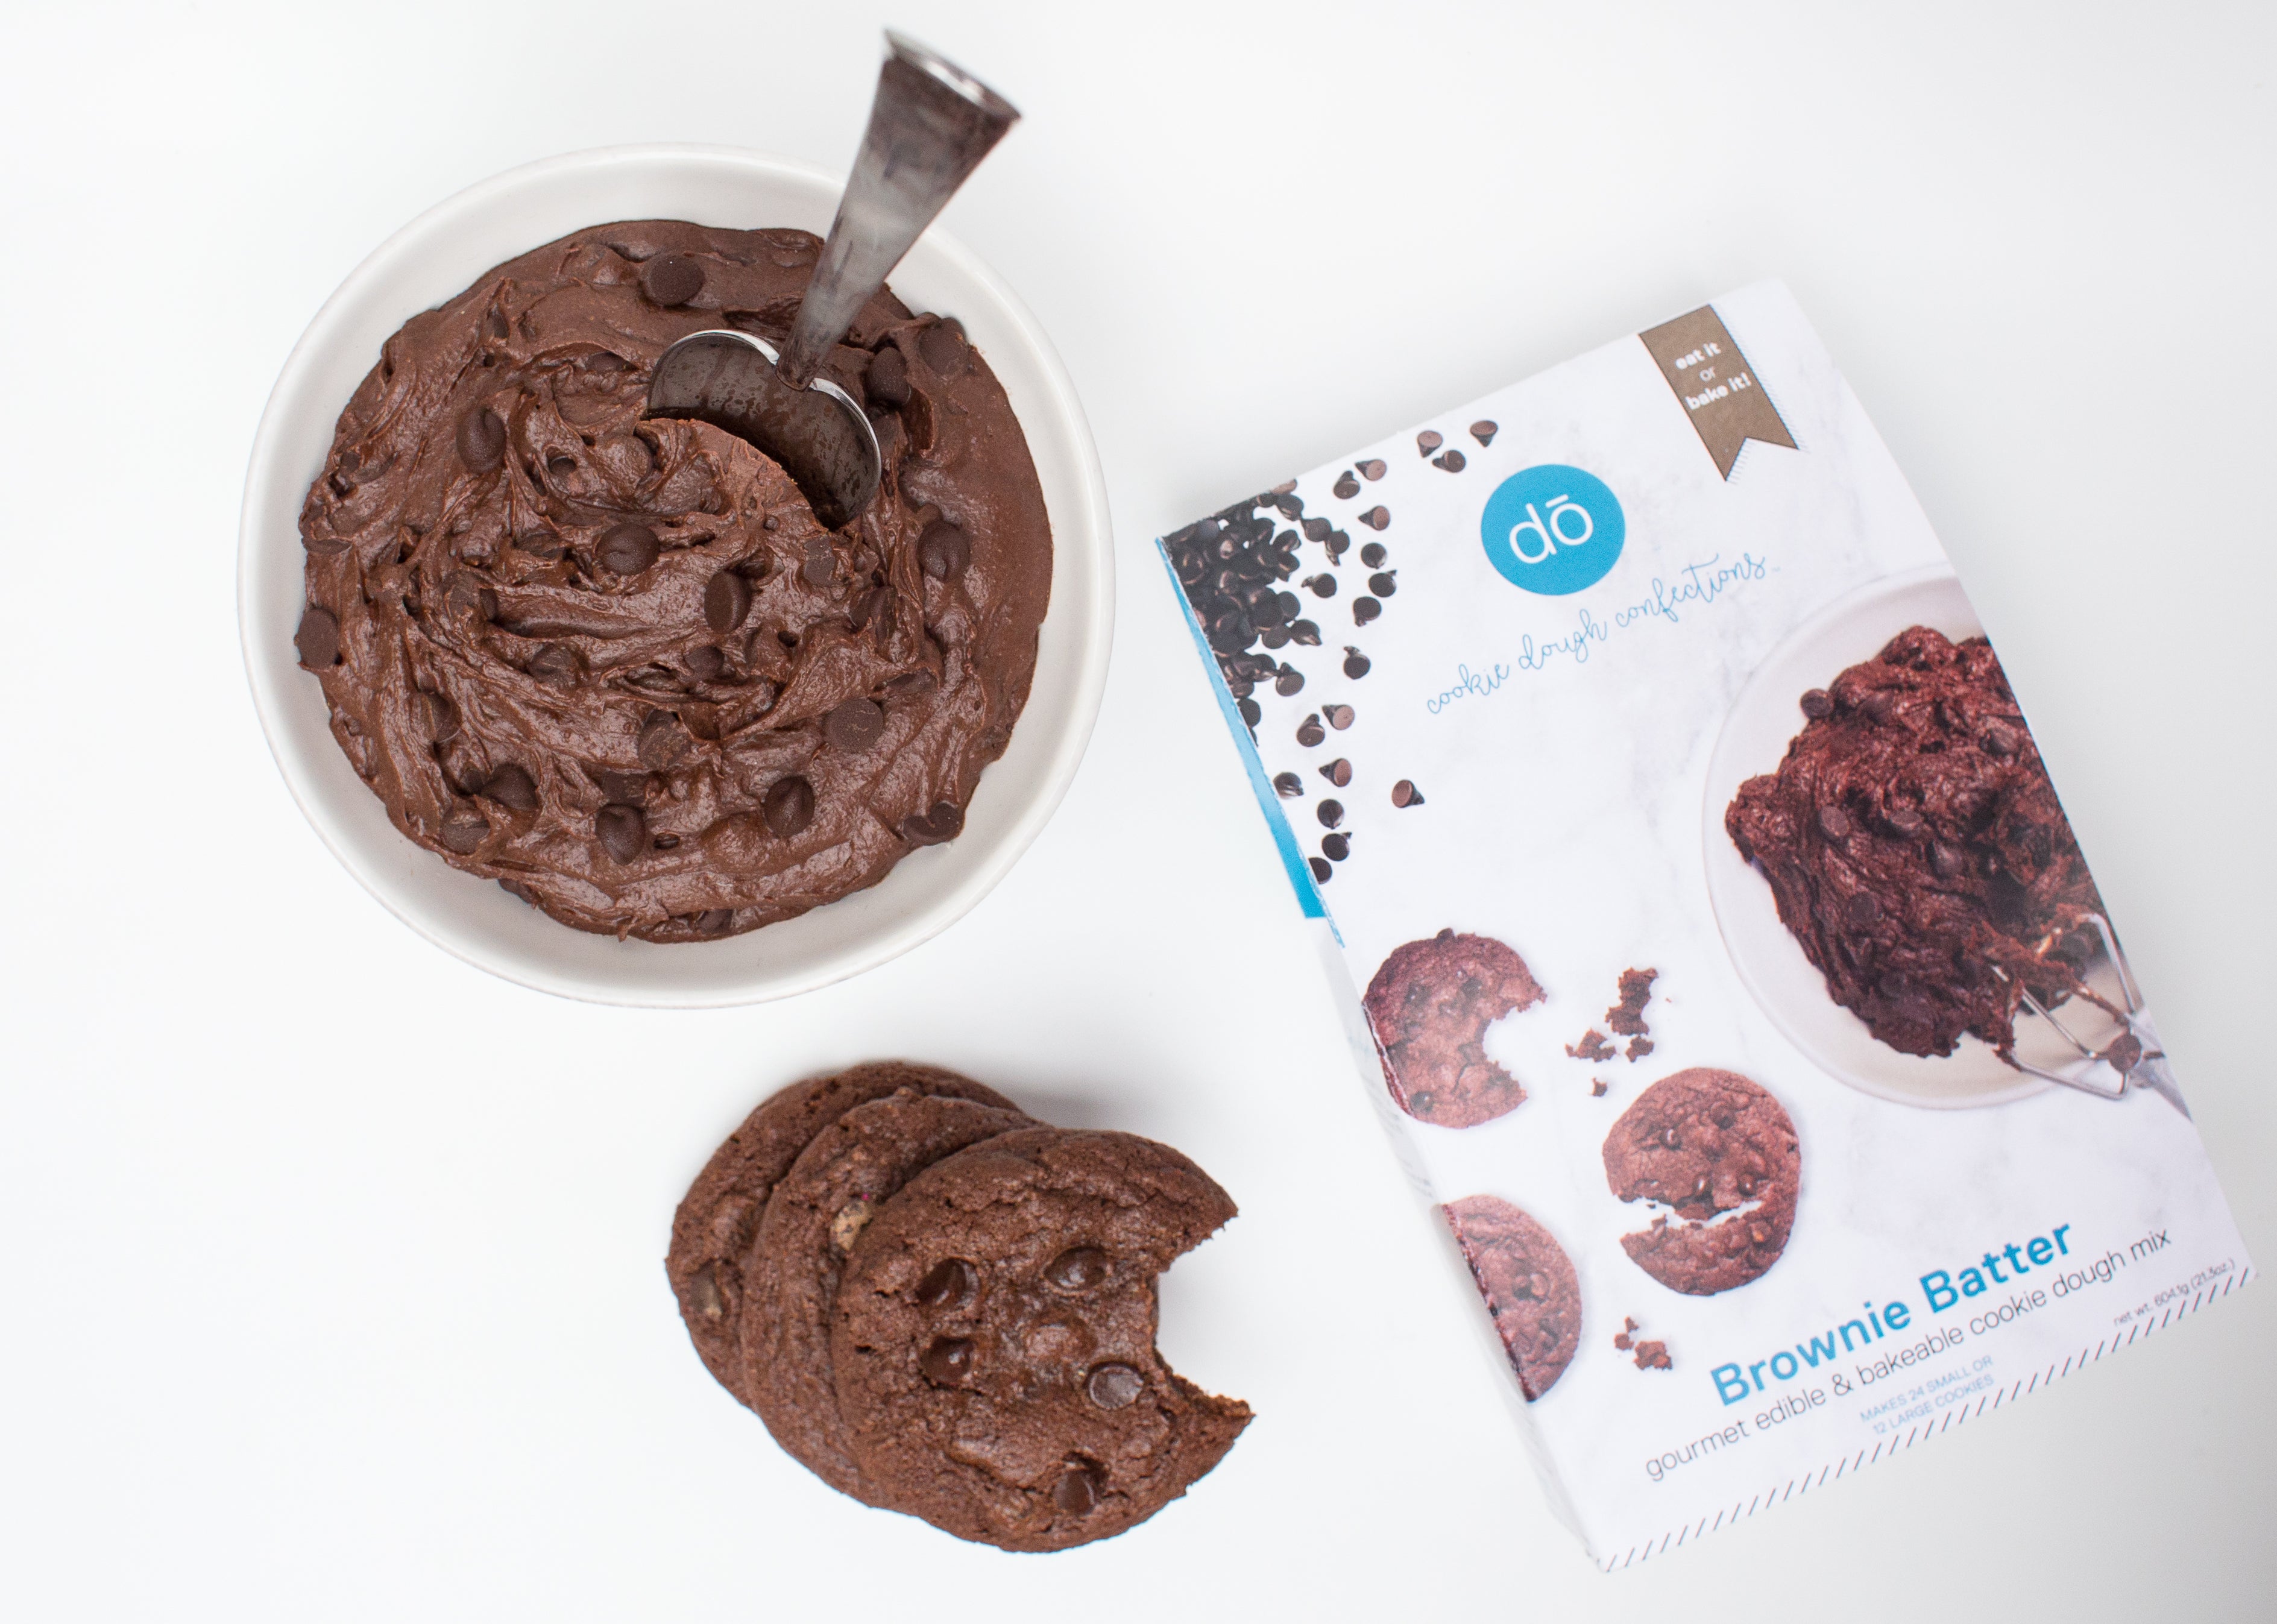 image of brownie batter mix and baked cookies